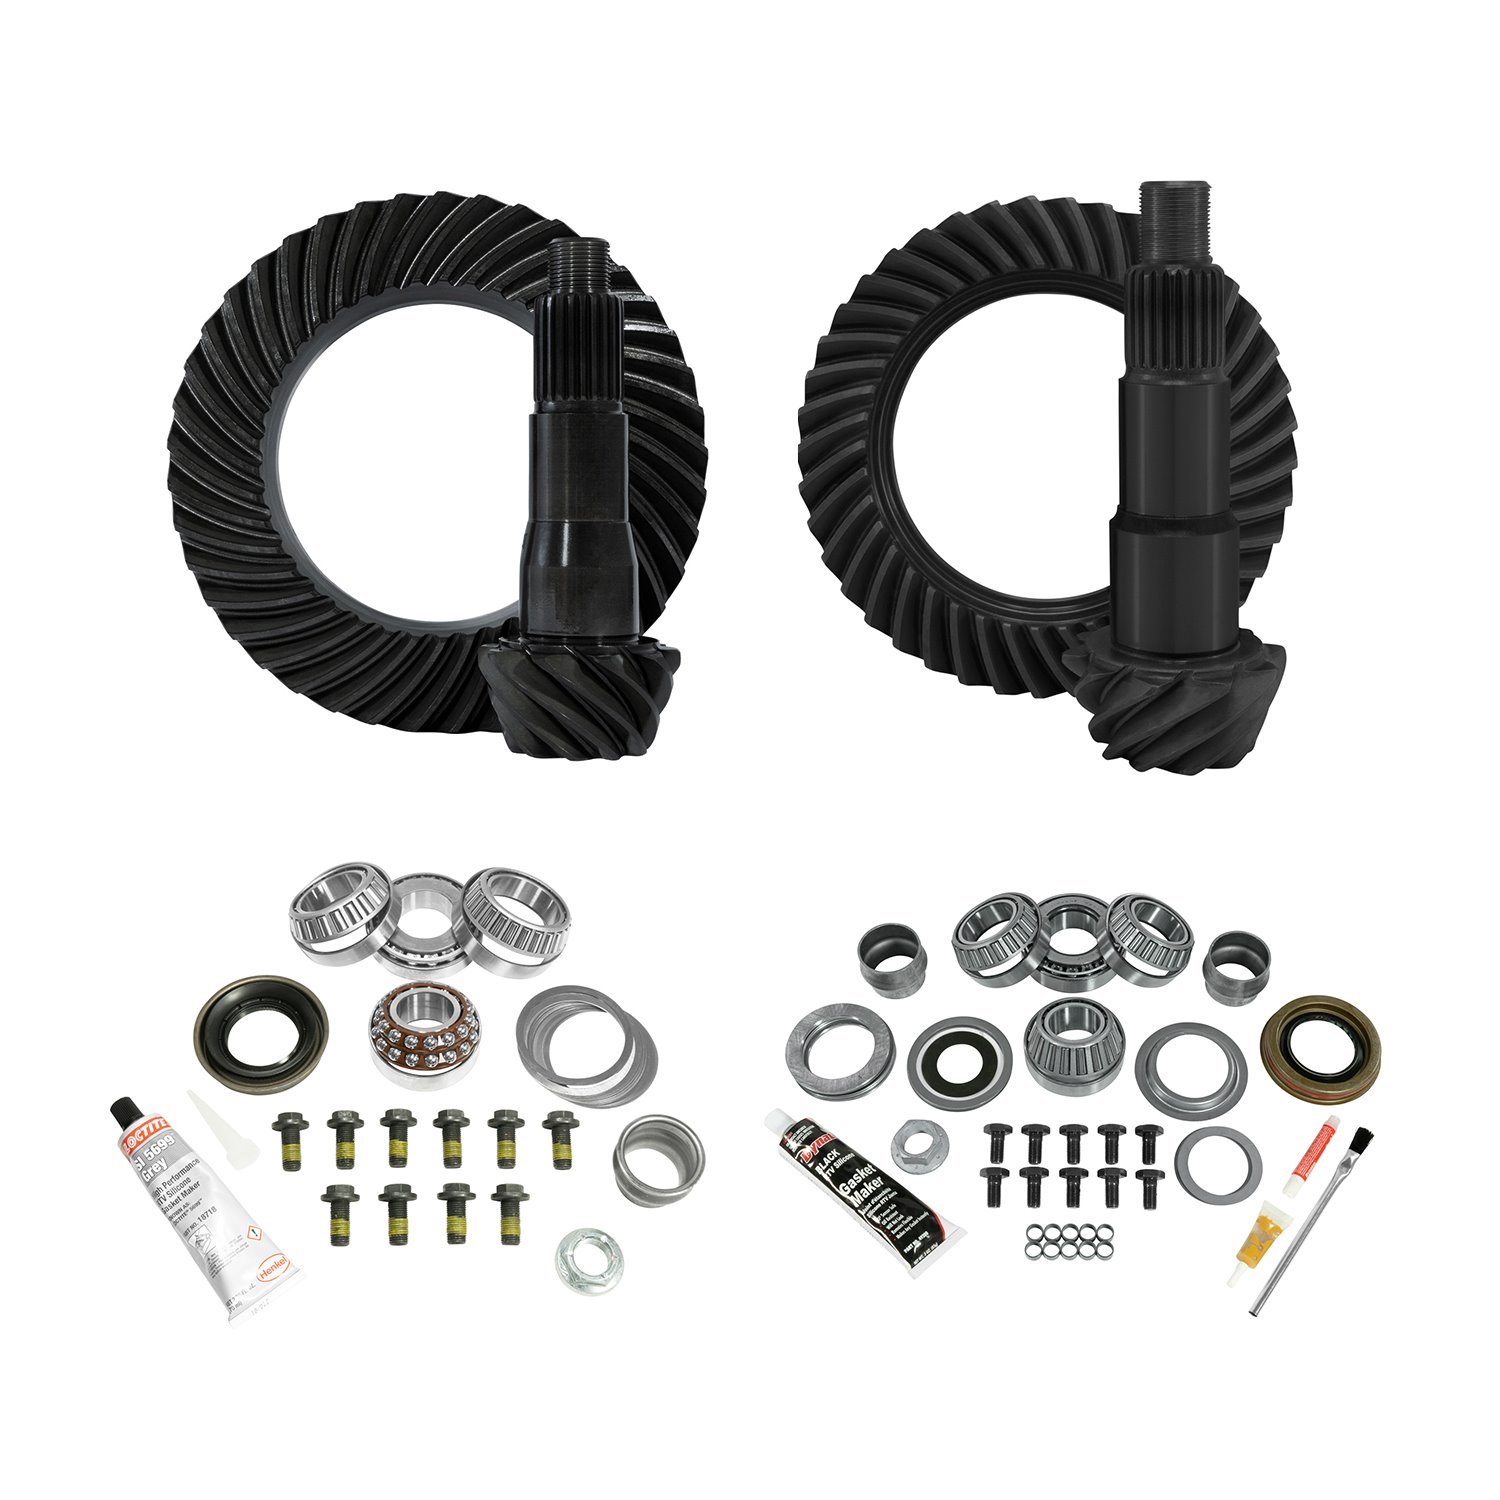 Re-Gear And Install Kit, D30 Front/D35 Rear, Jeep